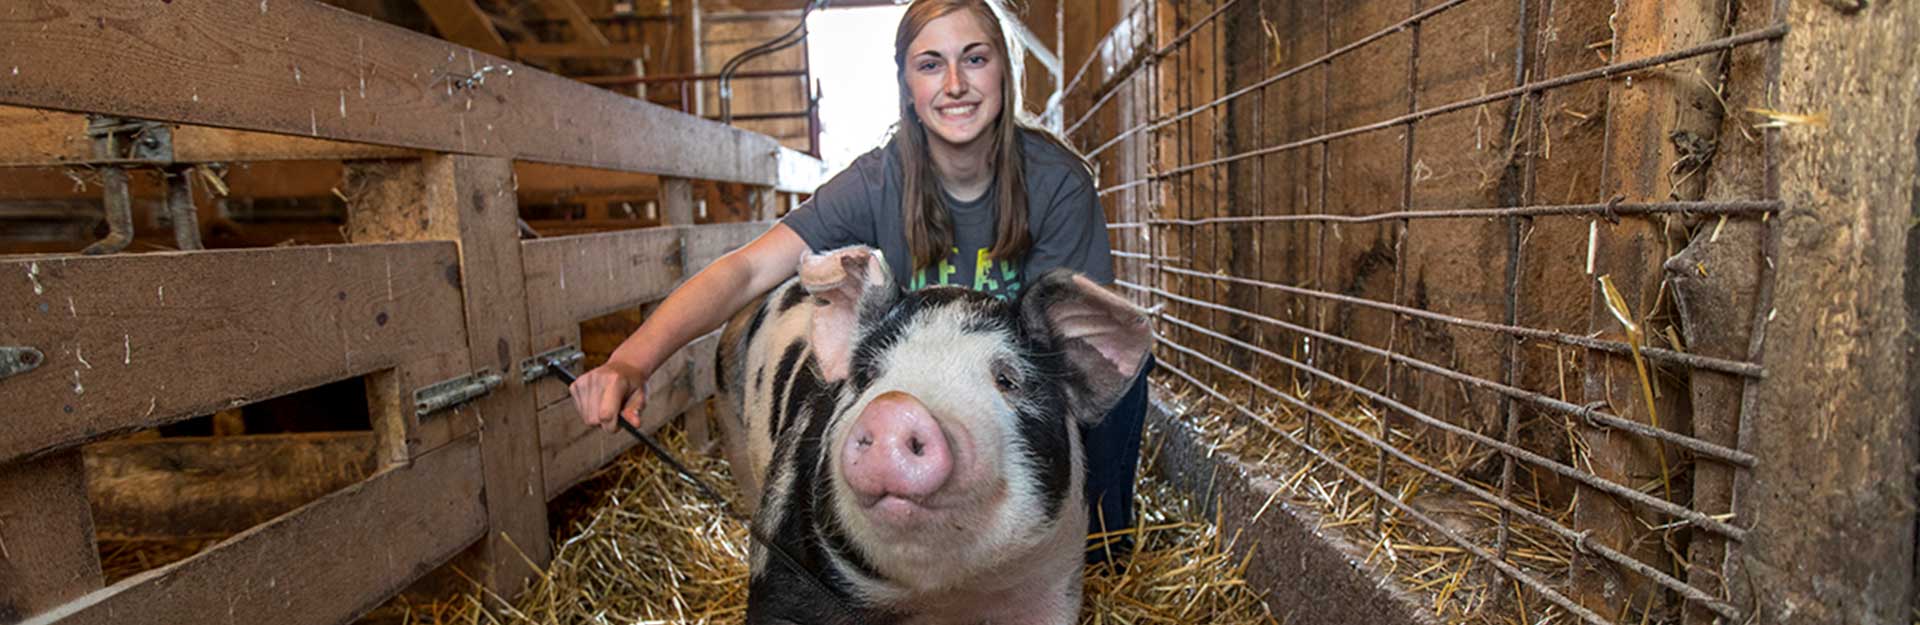 girl with pig in a barn